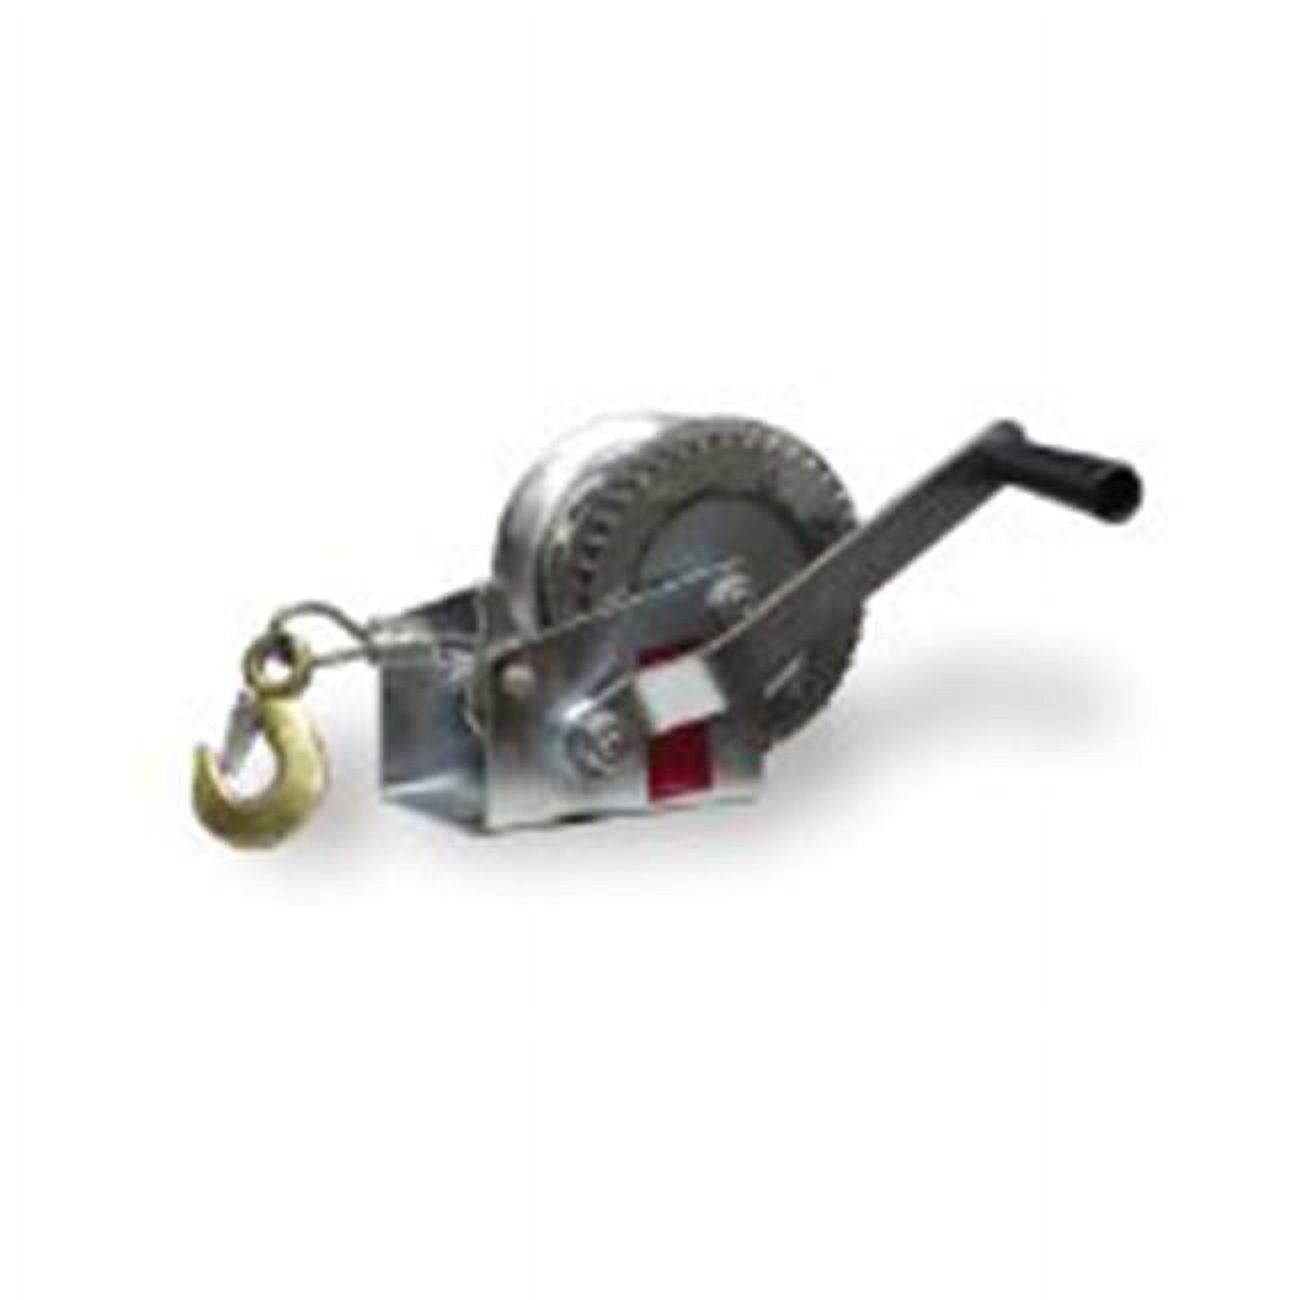 Sportsman W1000 1000 lb 1/4'' x 32' Steel Cable Hand Winch - image 1 of 2